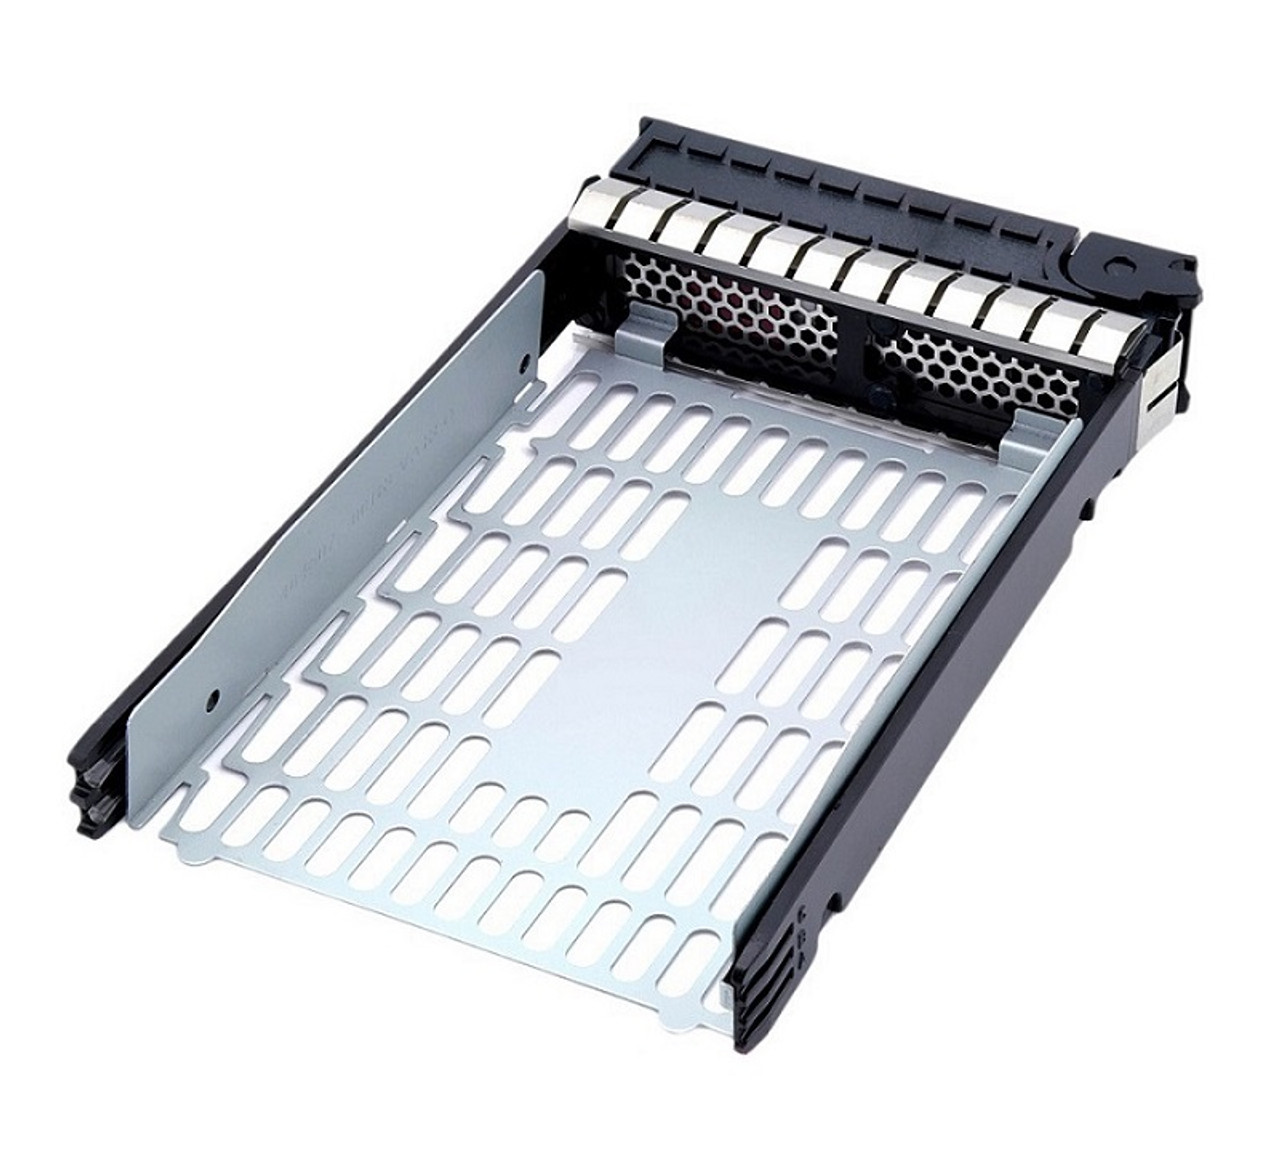 99YVC - Dell Hot-pluggable SCSI Hard Drive Tray Sled Bracket for PowerEdge and PowerVault Servers